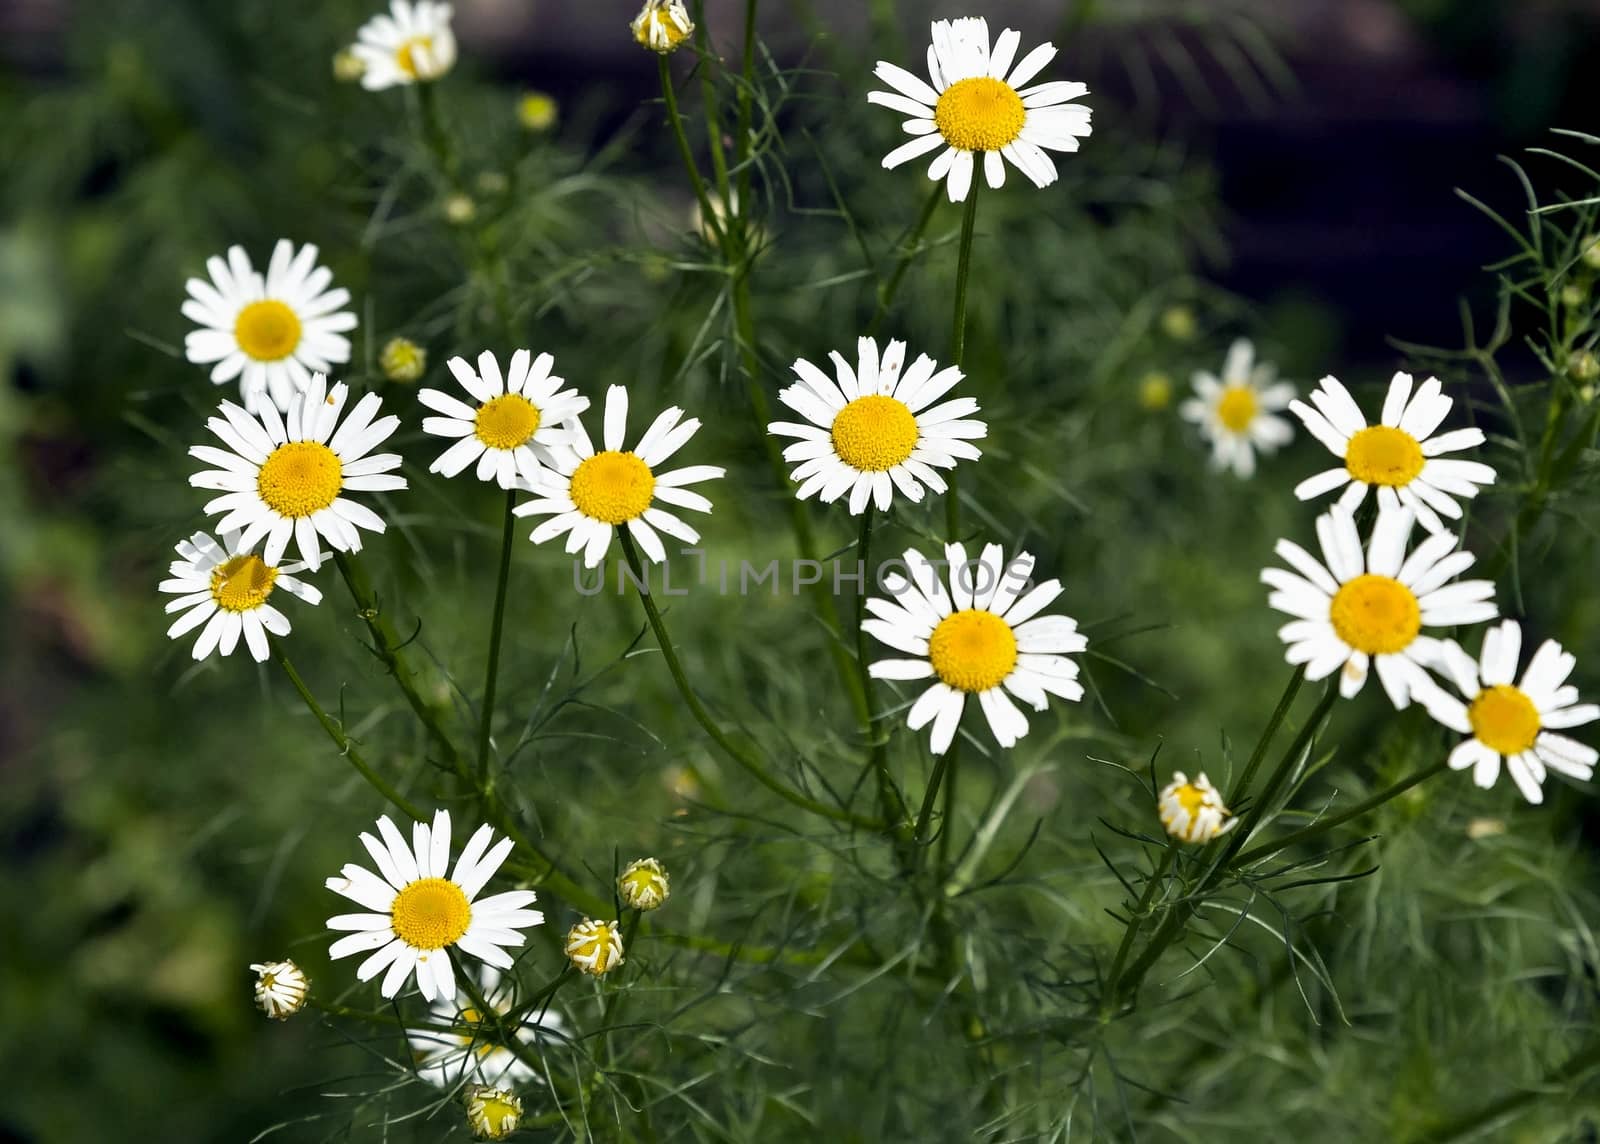 blooming garden chamomile on a natural green background